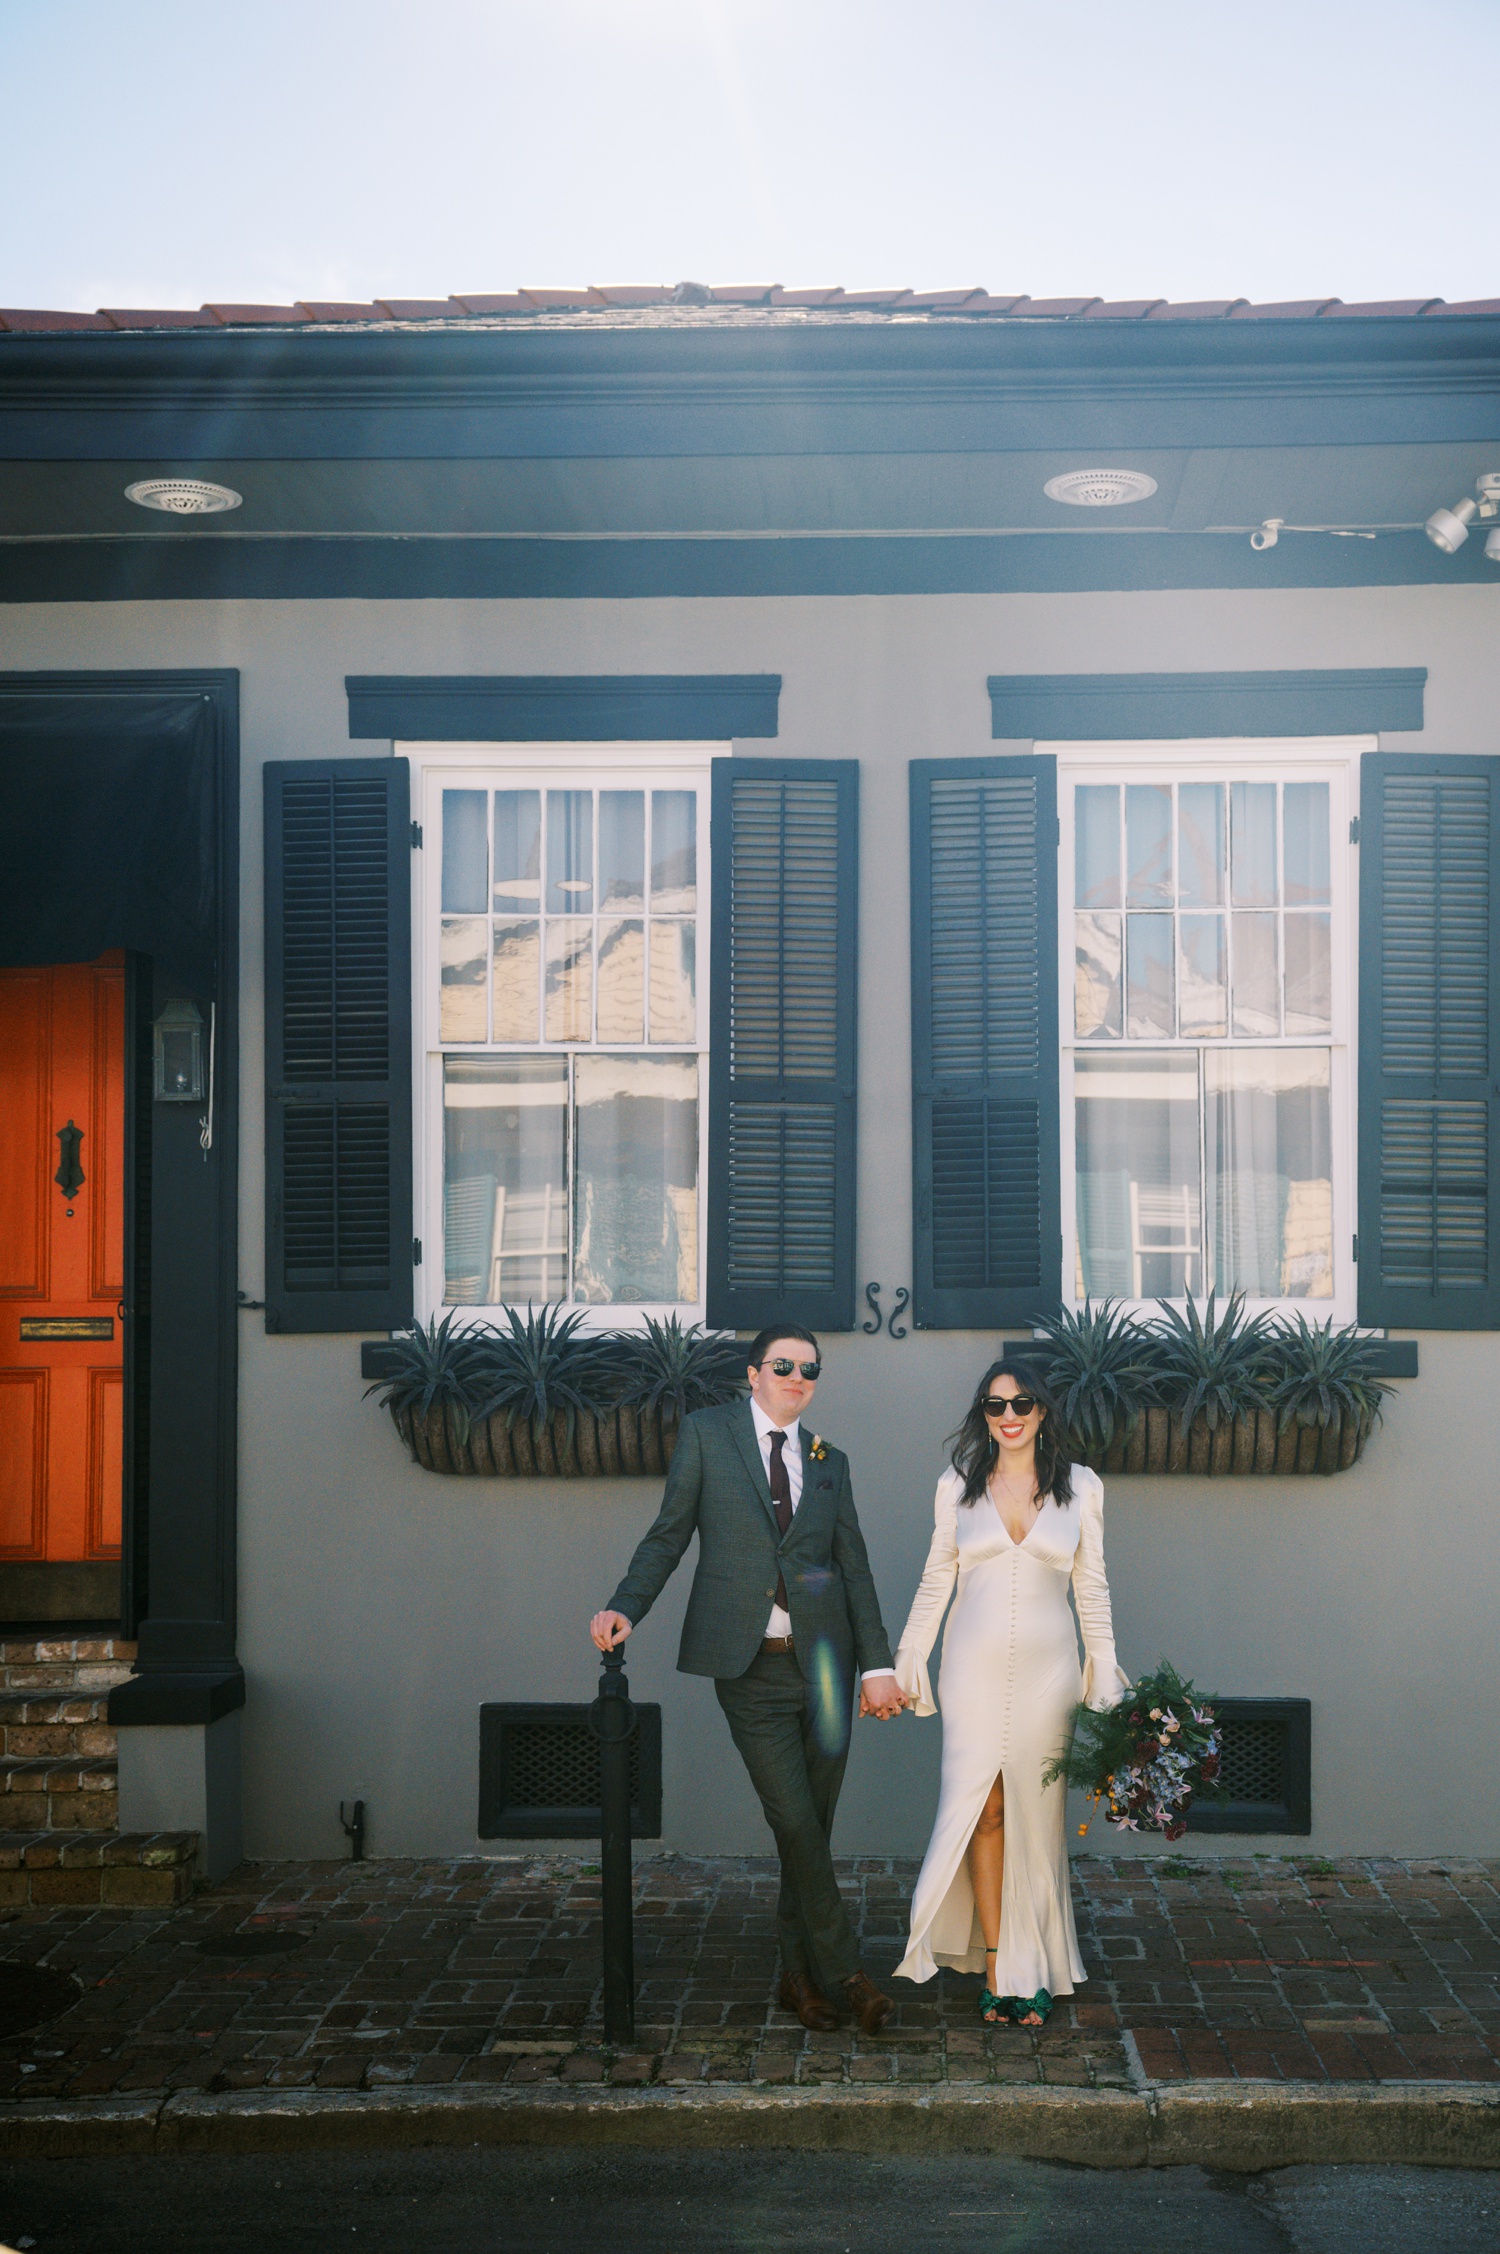 A bride and groom pose in front of a historic wedding venue wearing sunglasses.